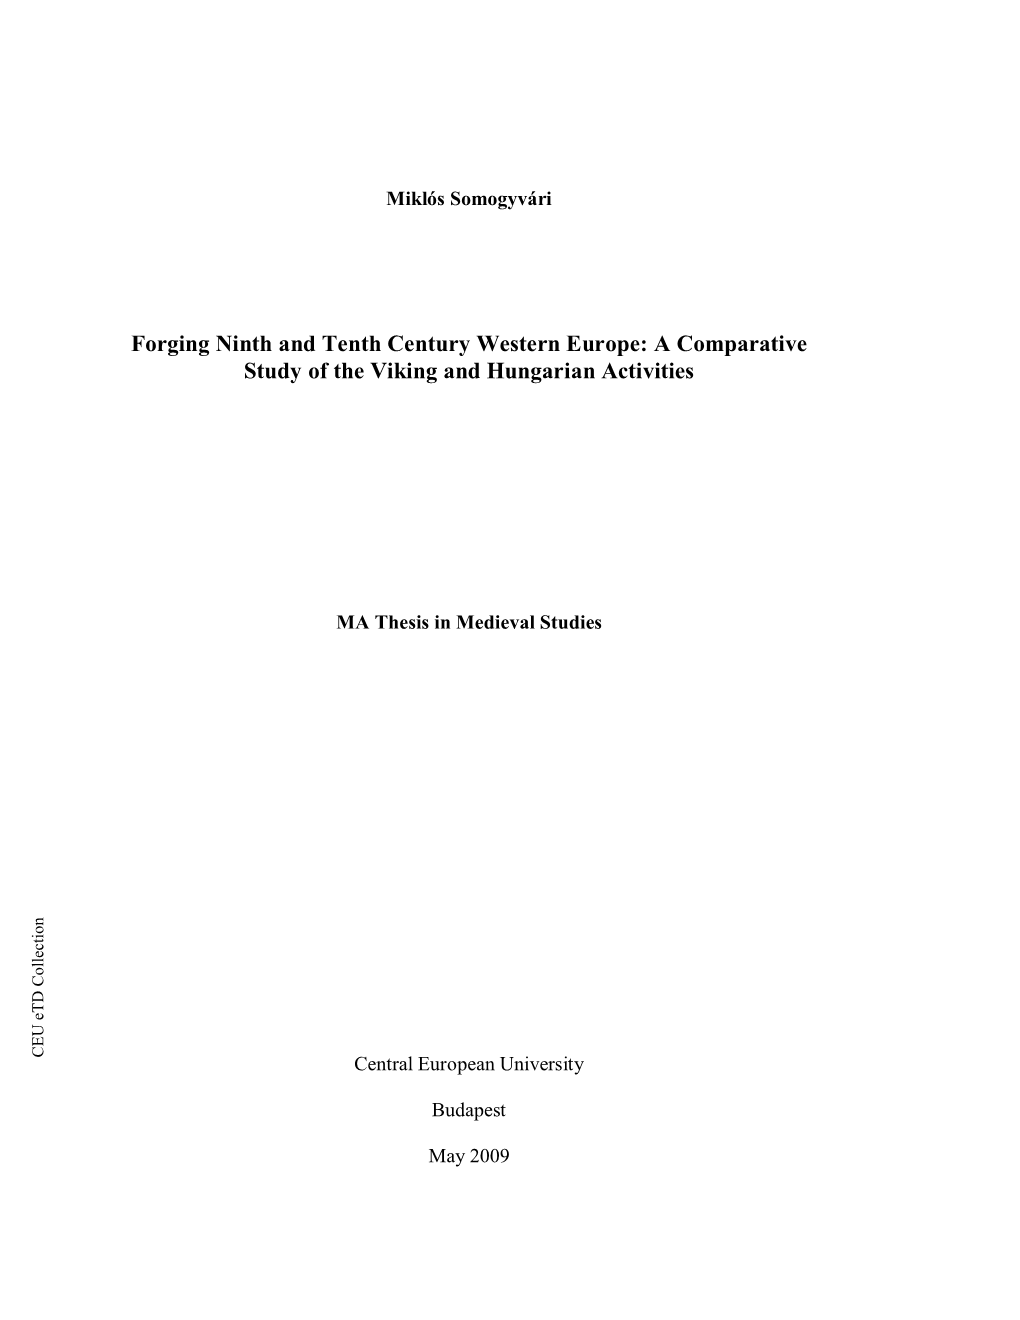 Forging Ninth and Tenth Century Western Europe: a Comparative